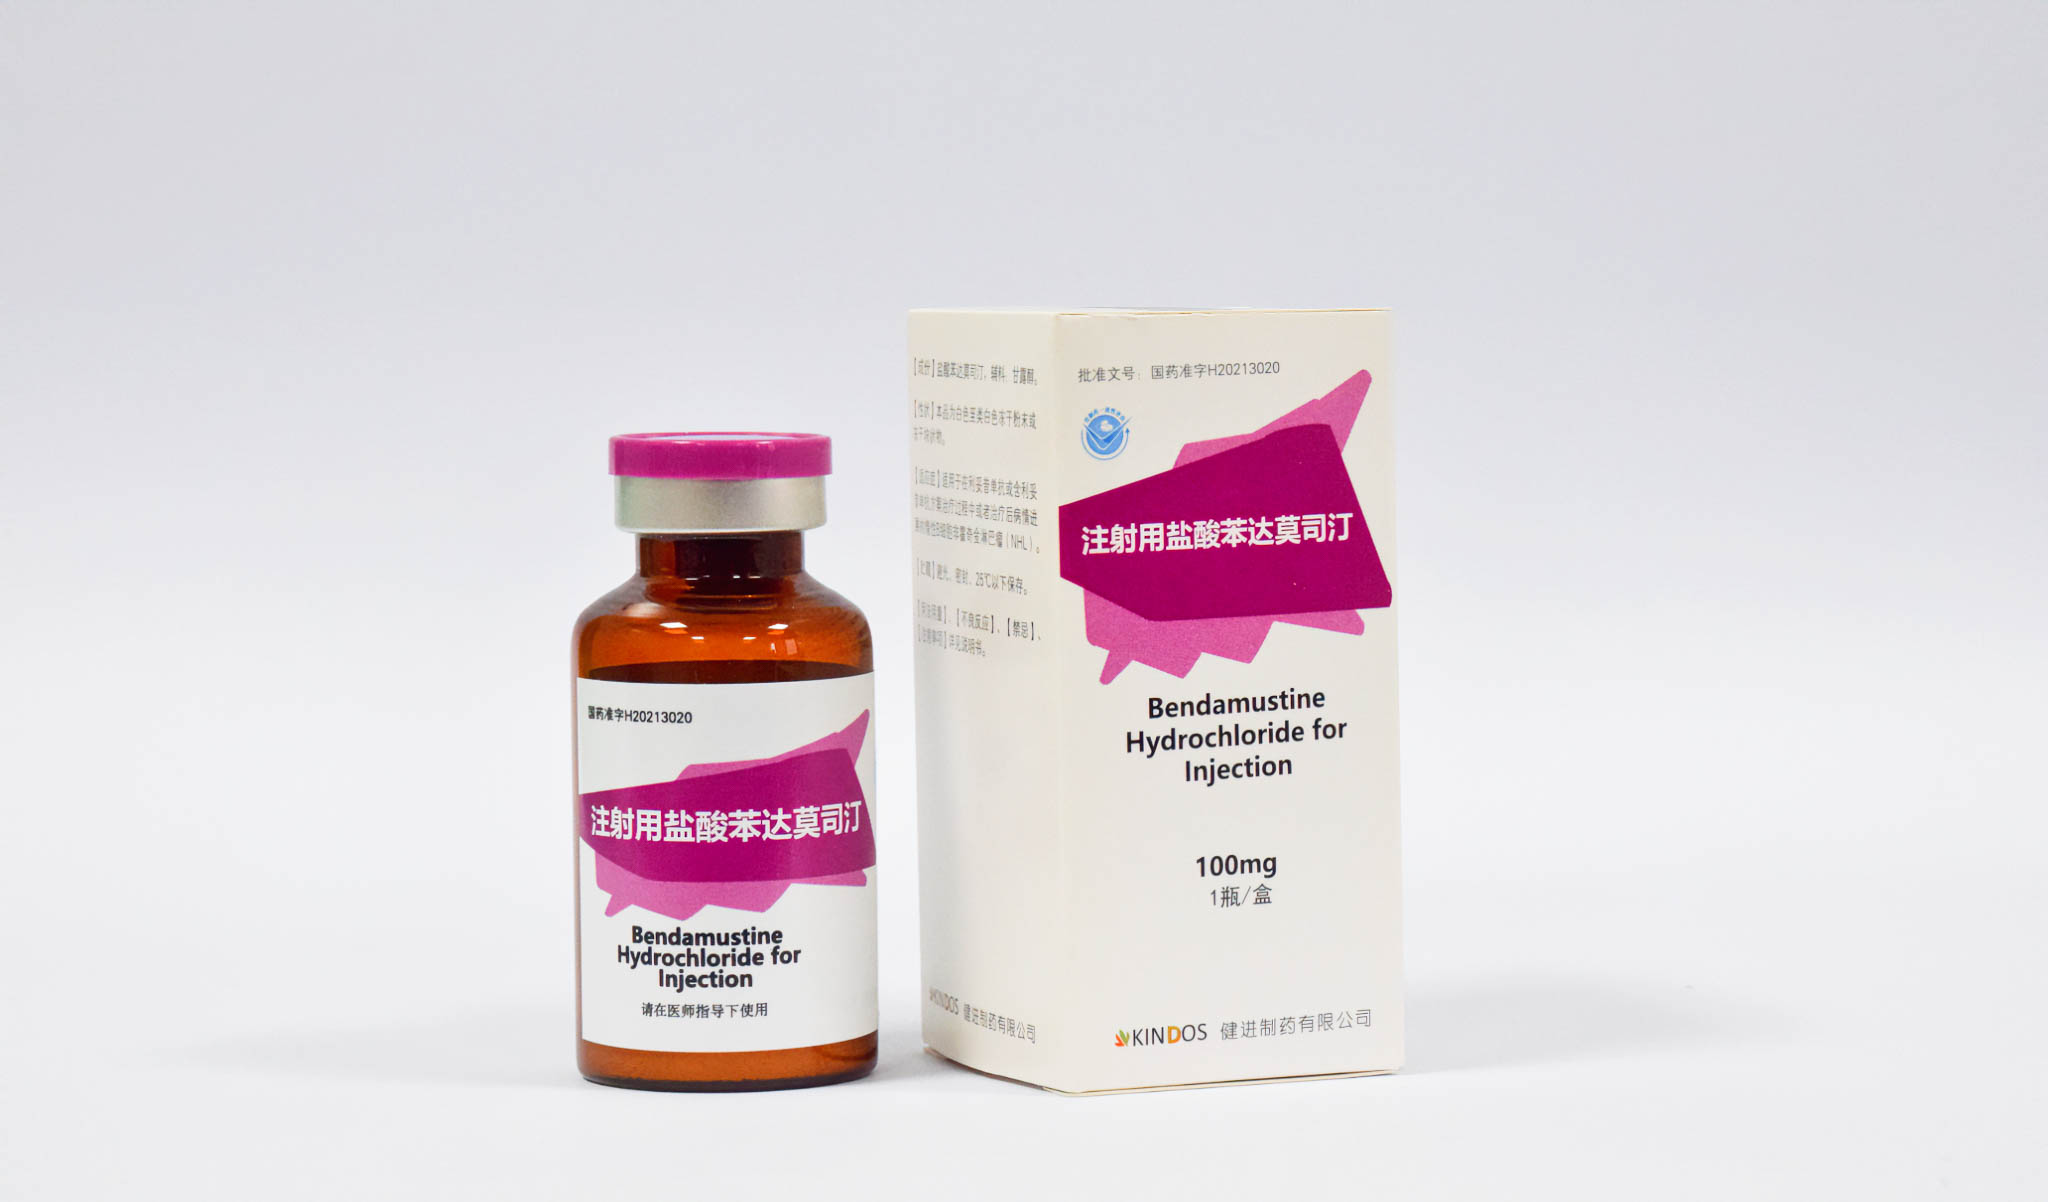 Bendamustine HCl for Injection